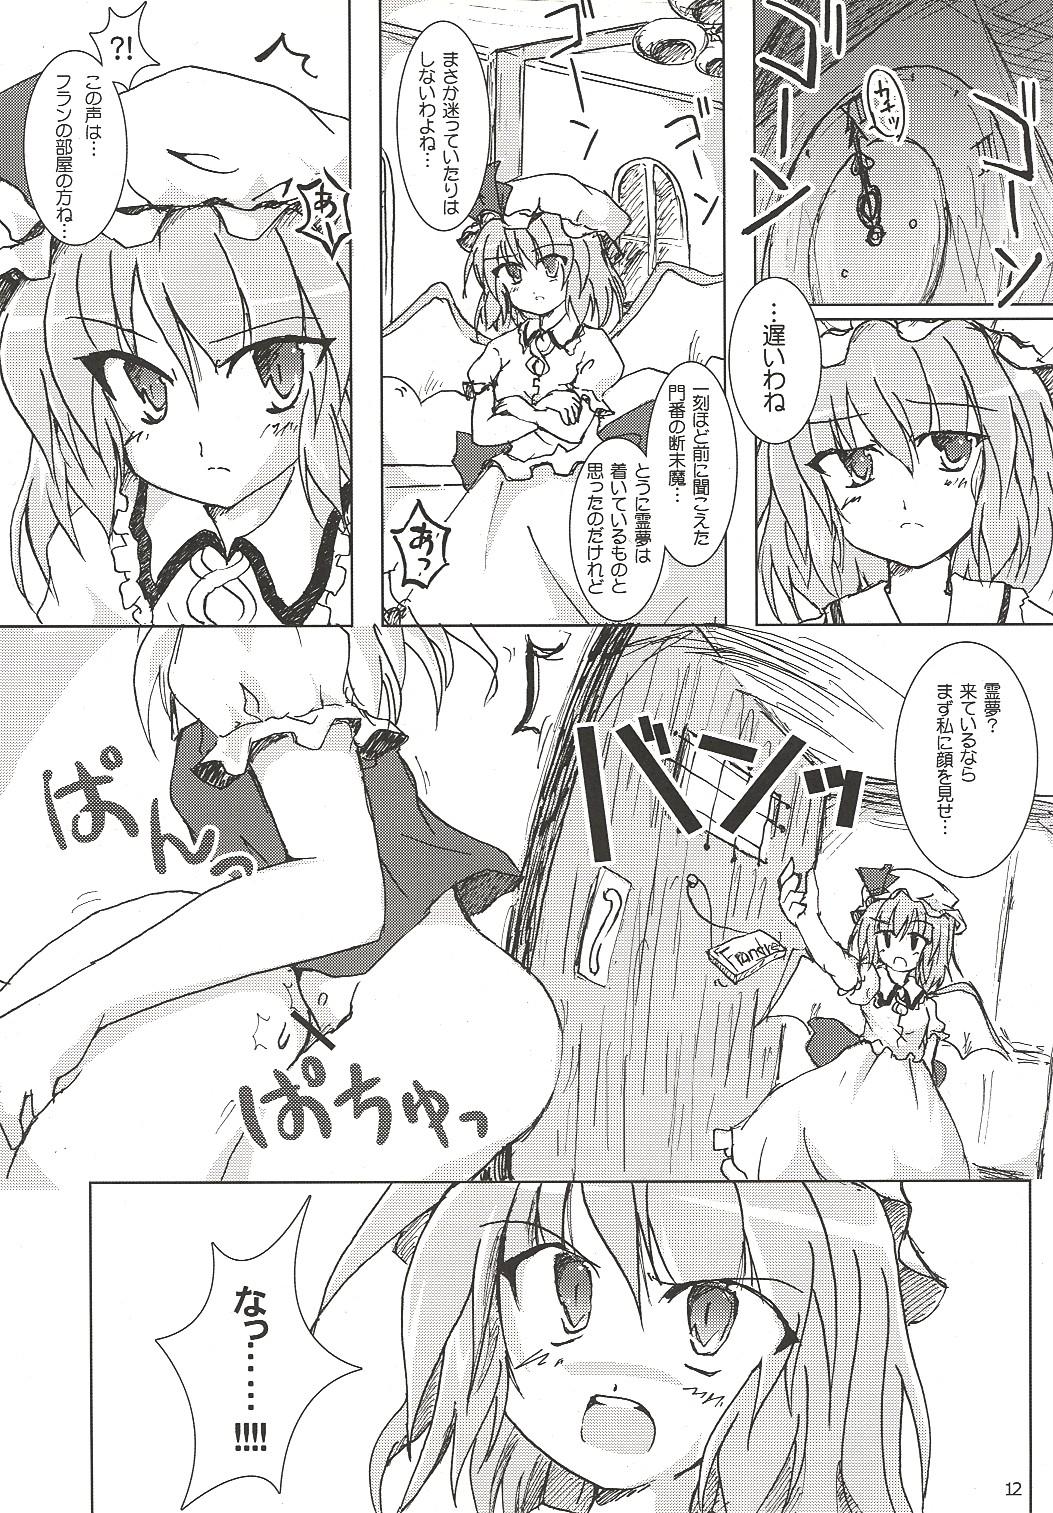 Longhair Humbly Made Steamed Yeast Bun - Touhou project Dancing - Page 11